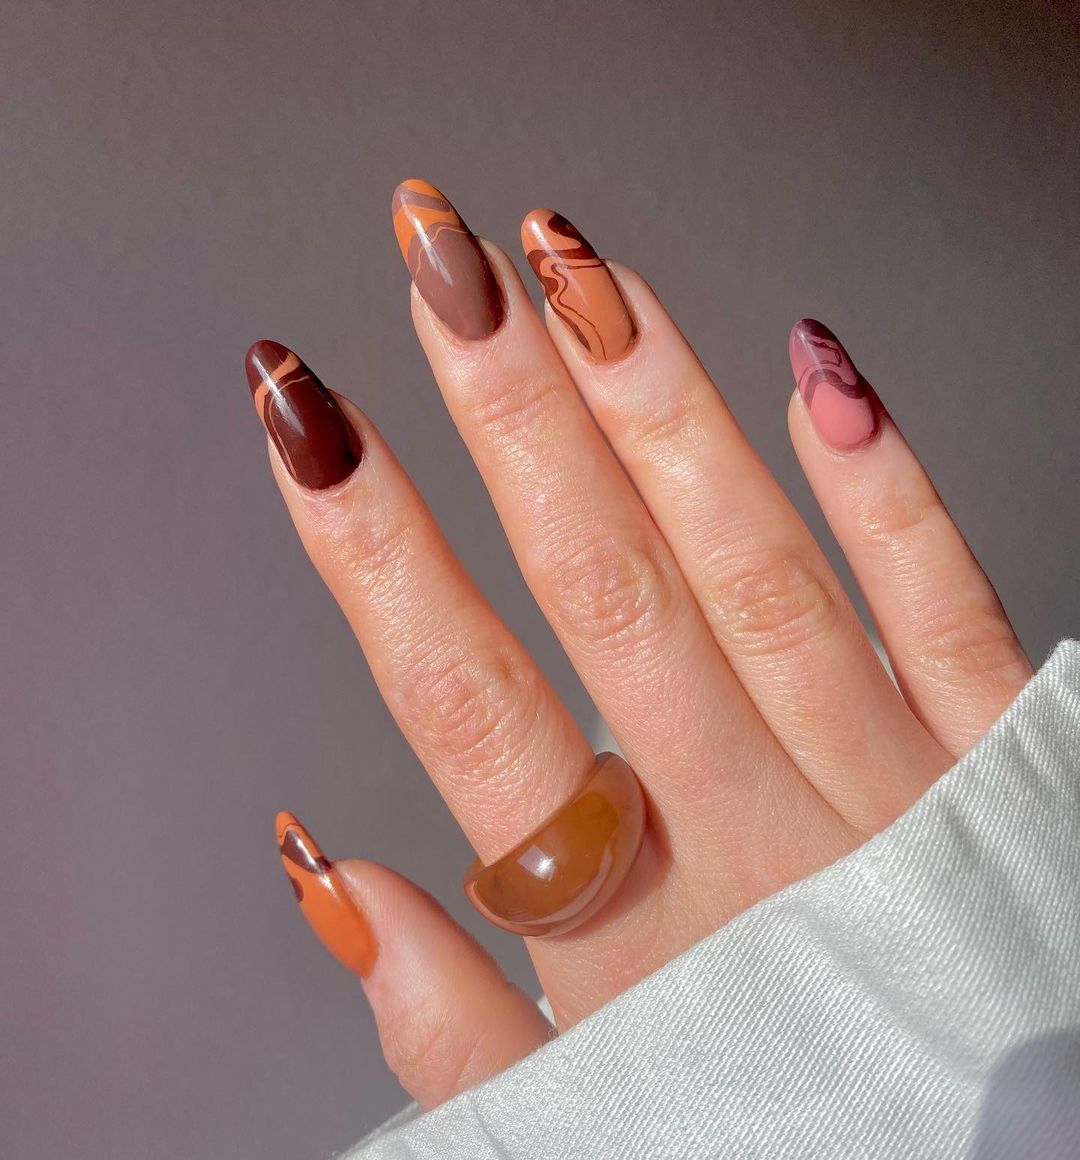 Short Round Gel Brown Nails with Lines